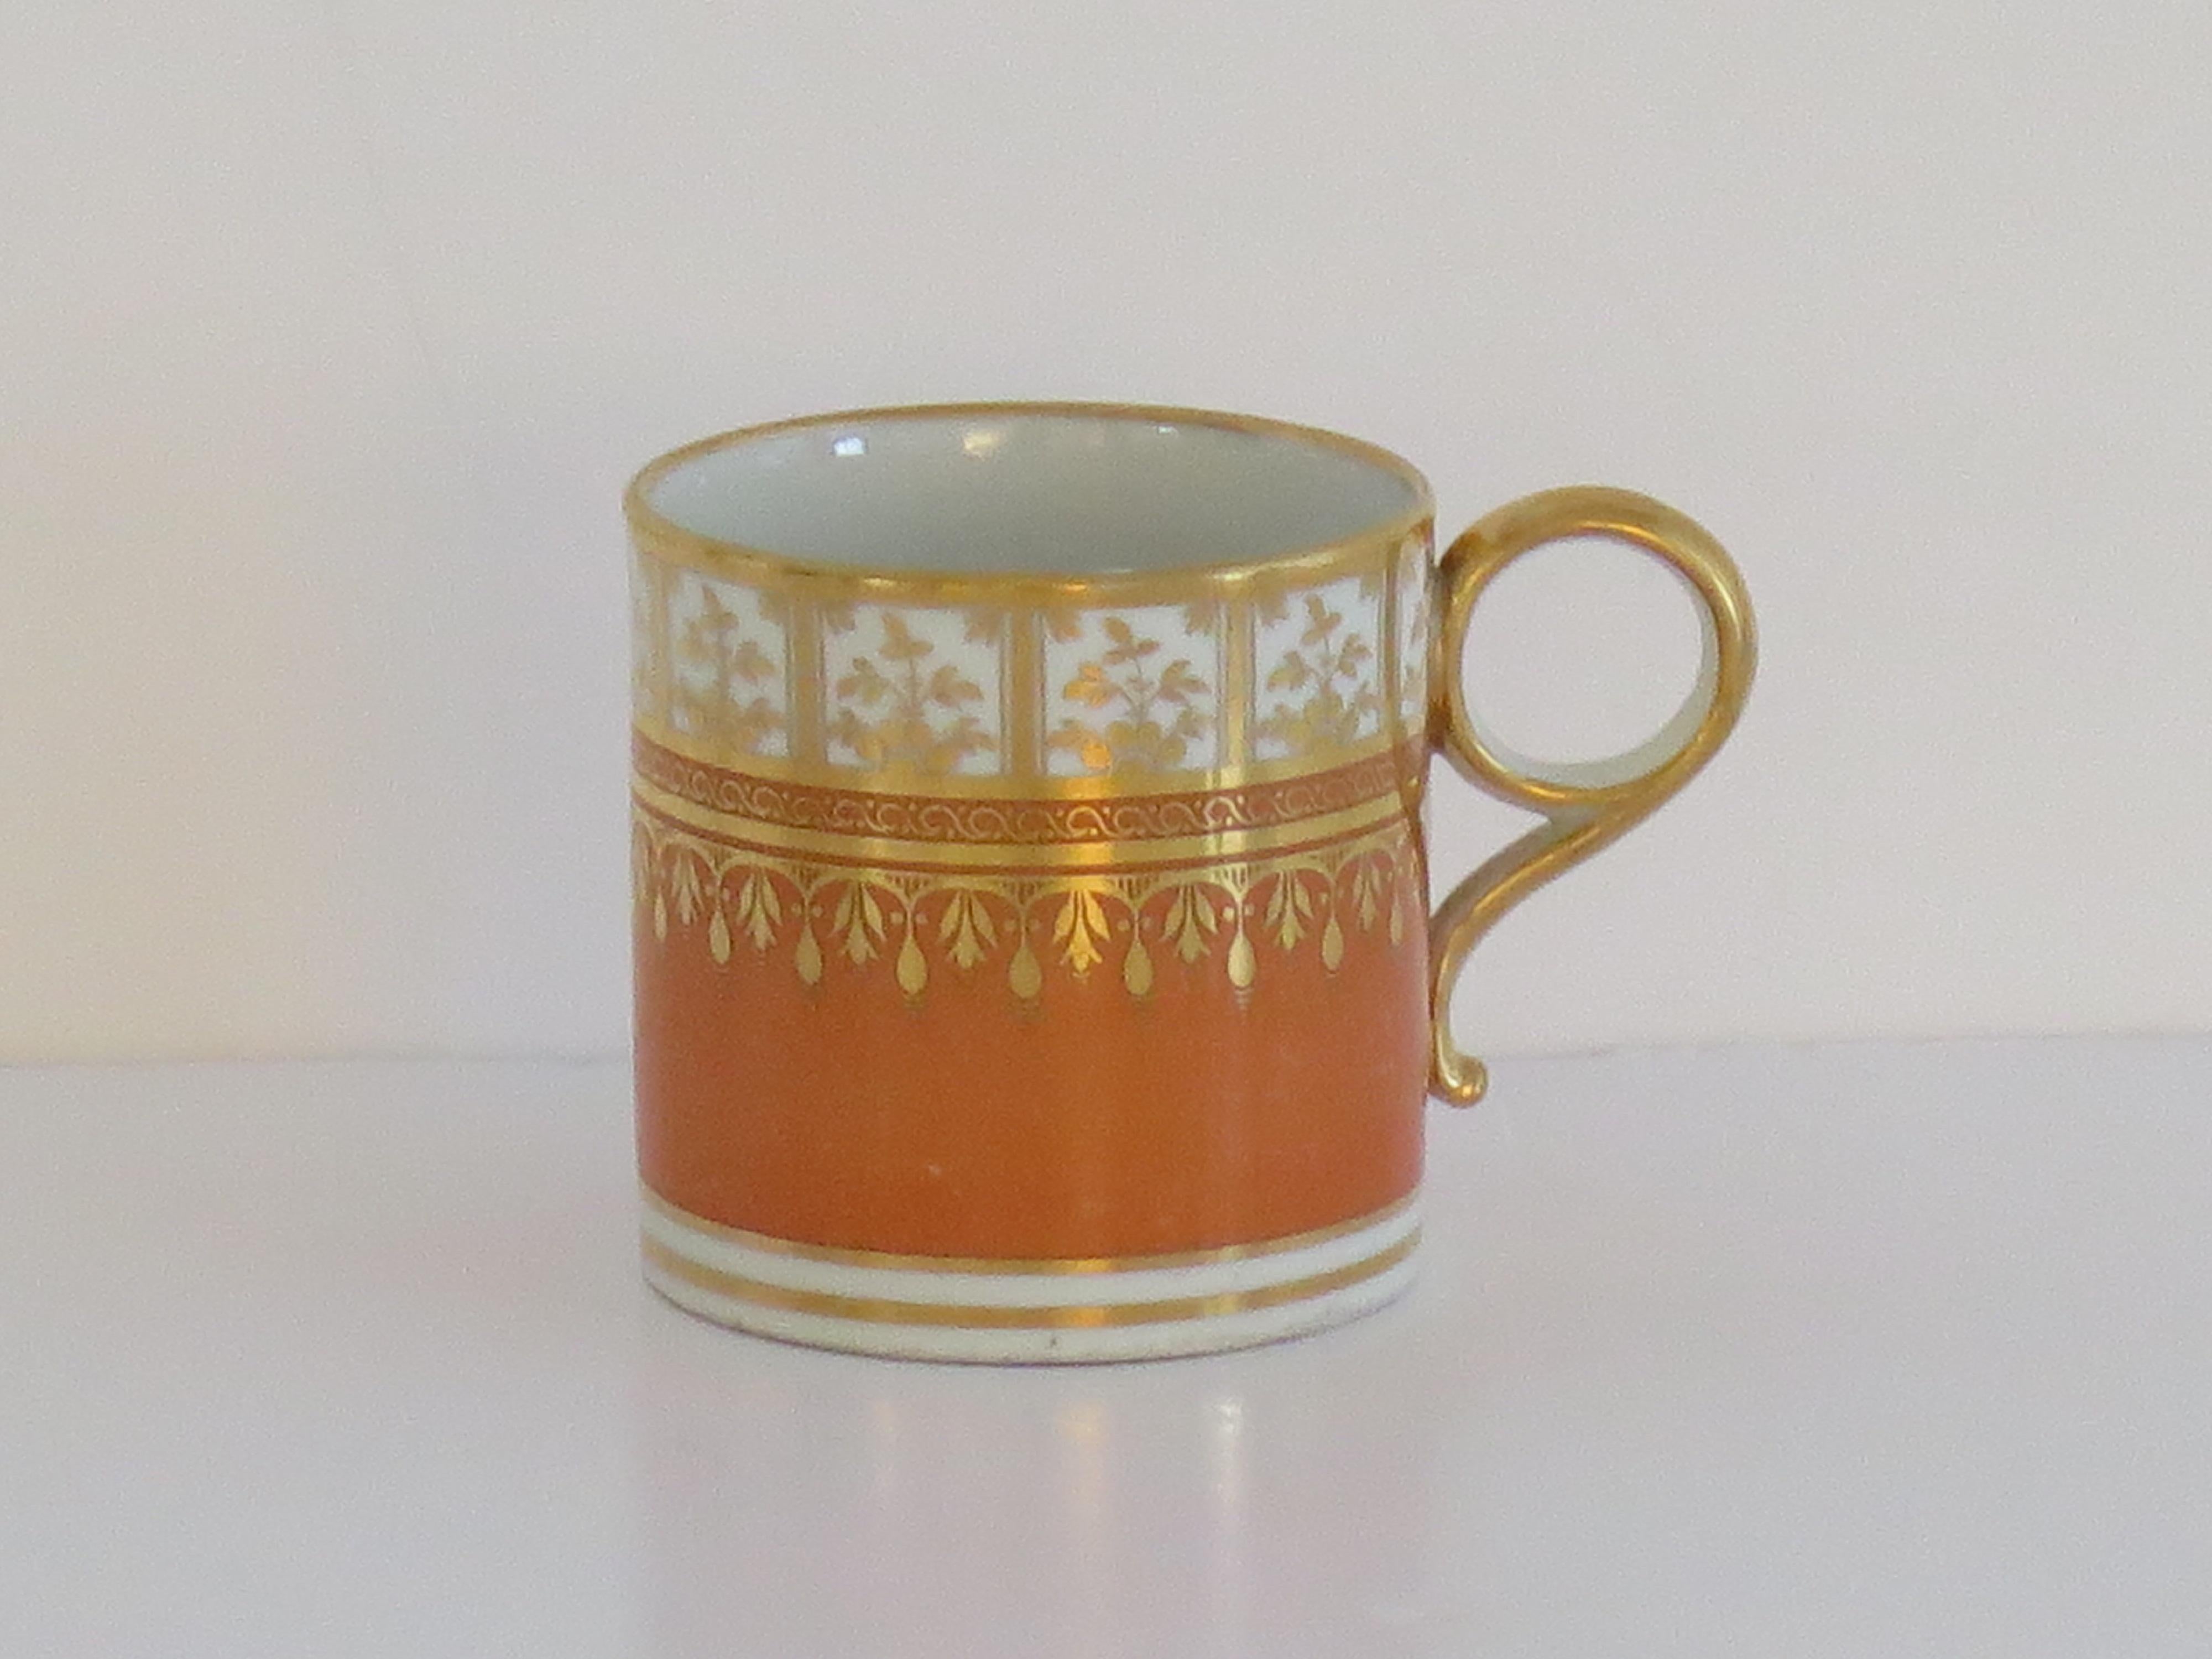 A very good Porcelain Coffee Can with a ring handle, hand decorated with an orange and gilt pattern by Worcester during the Barr period, fully marked to the base and dating to circa 1792-1807.

This is a well potted Coffee Can with nominally